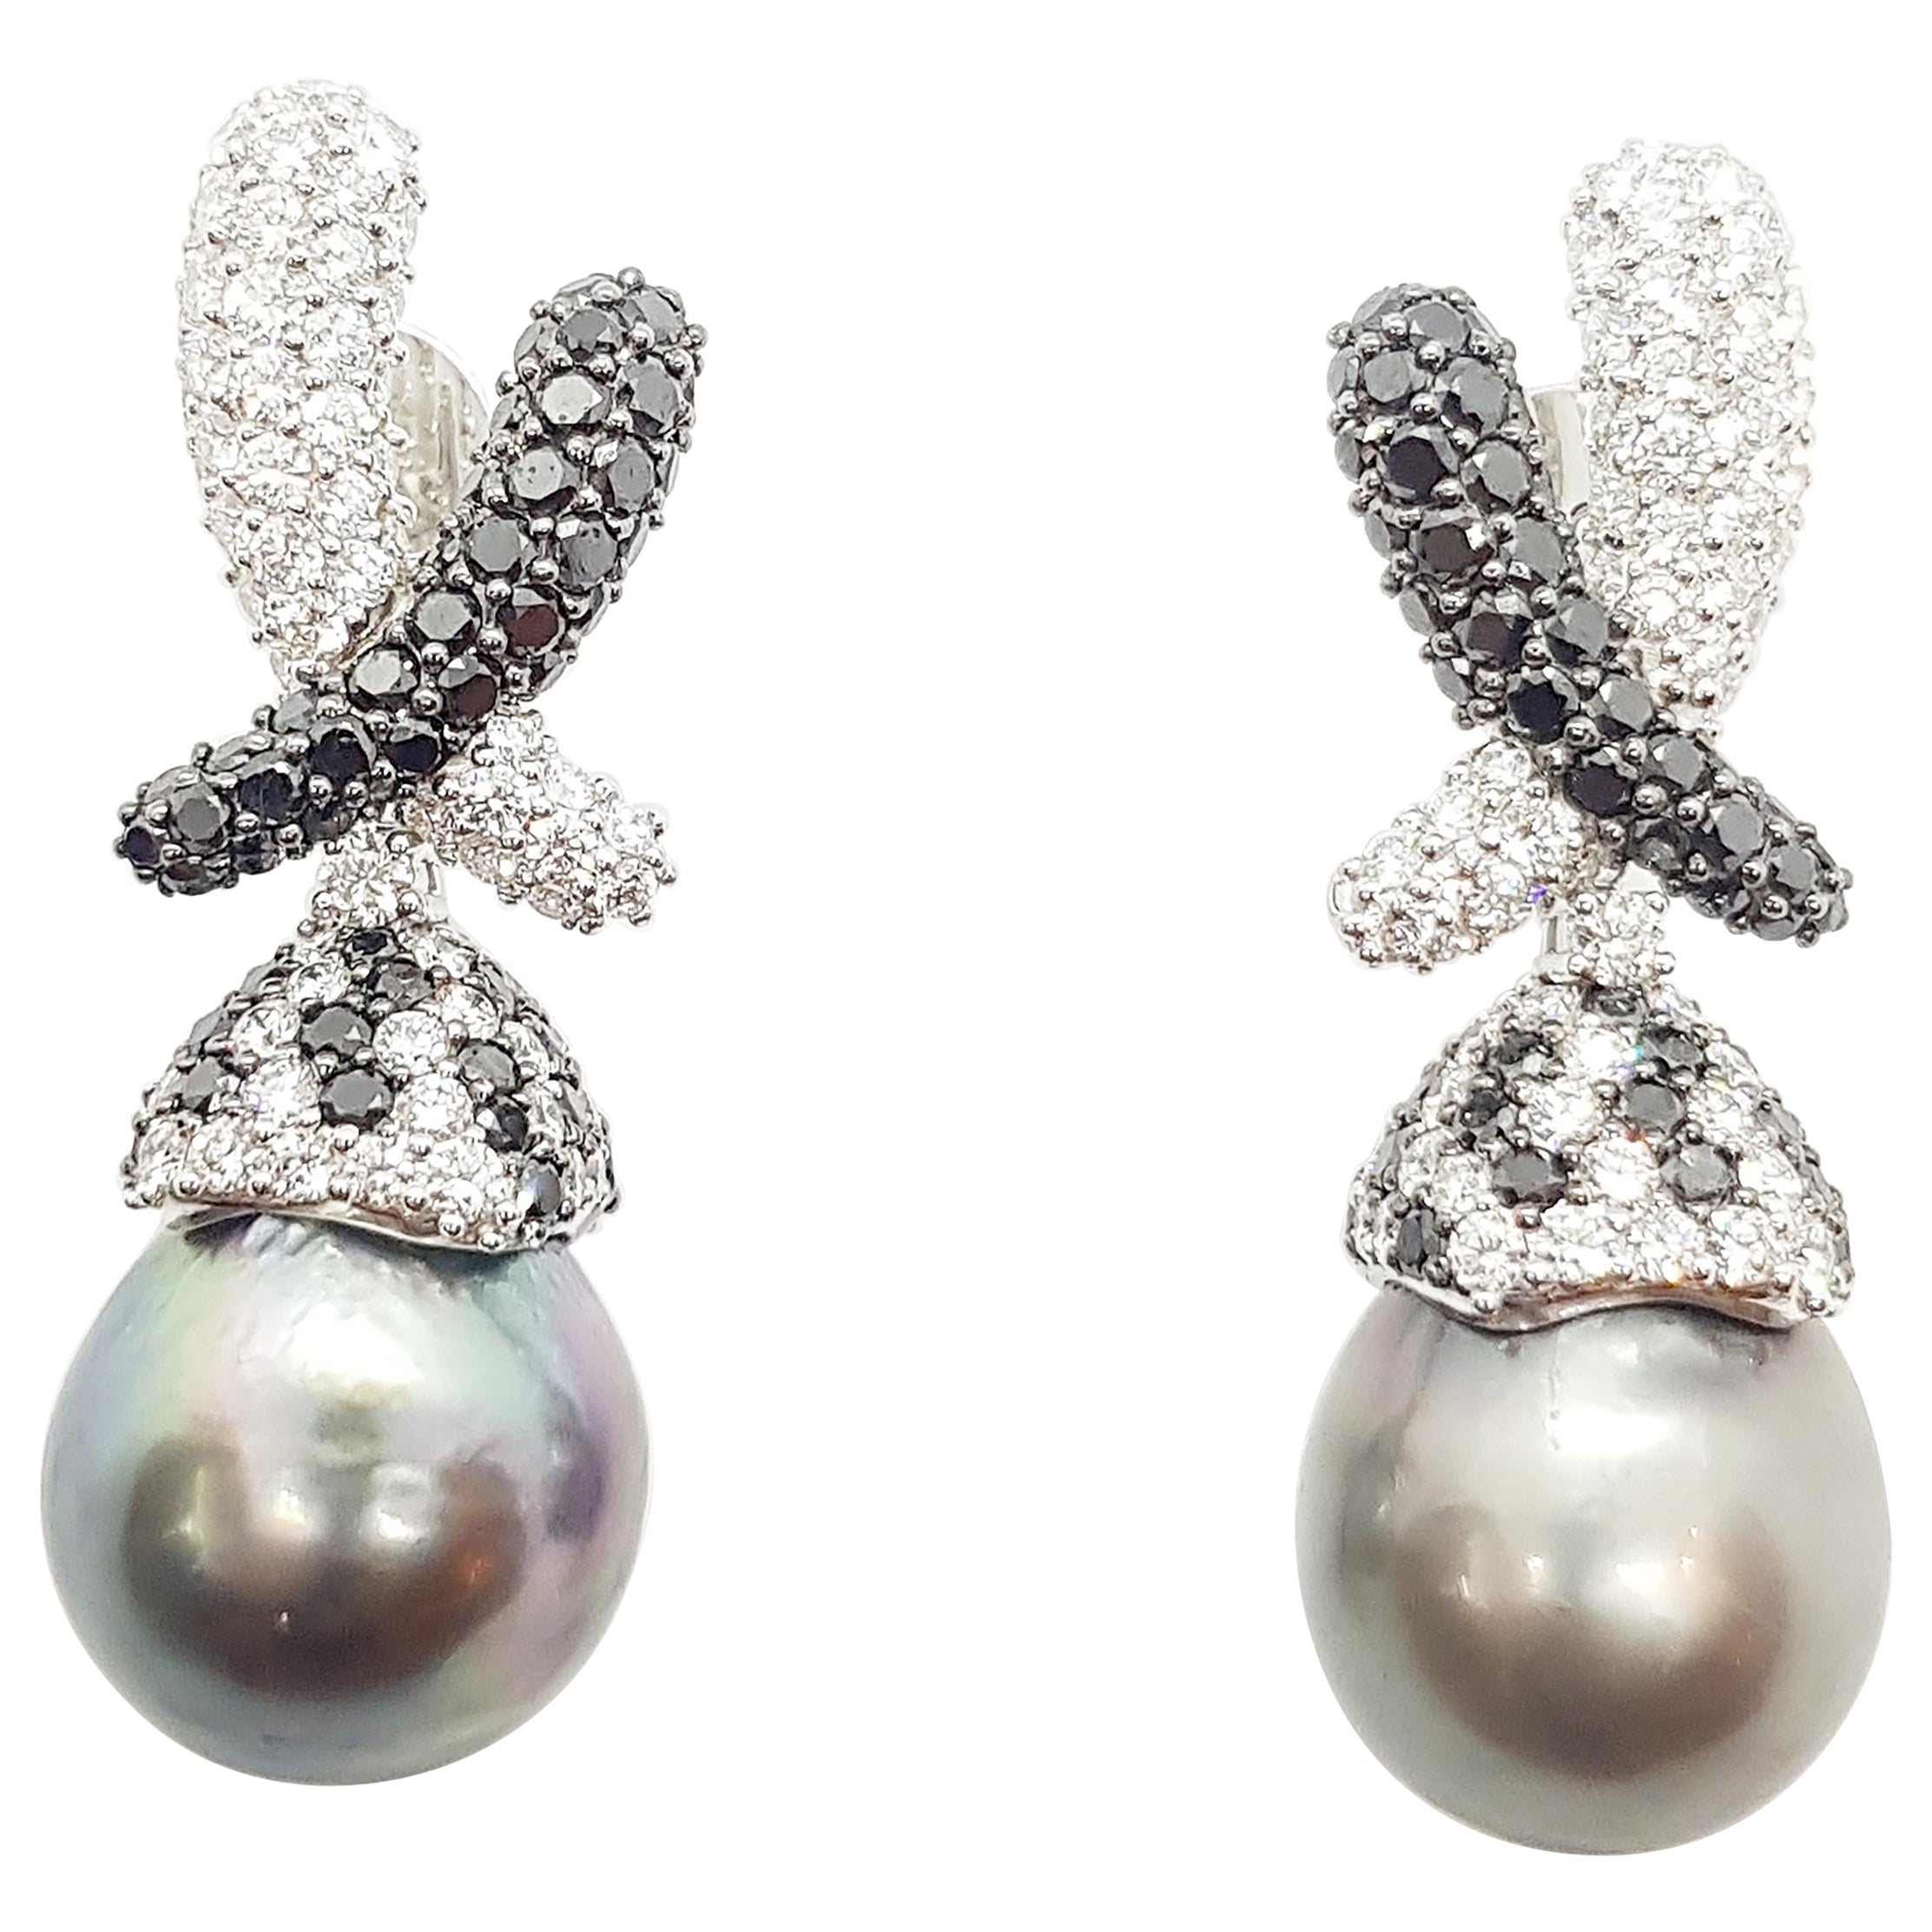 South Sea Pearl, Black and White Diamond Detachable Earrings in 18K White Gold